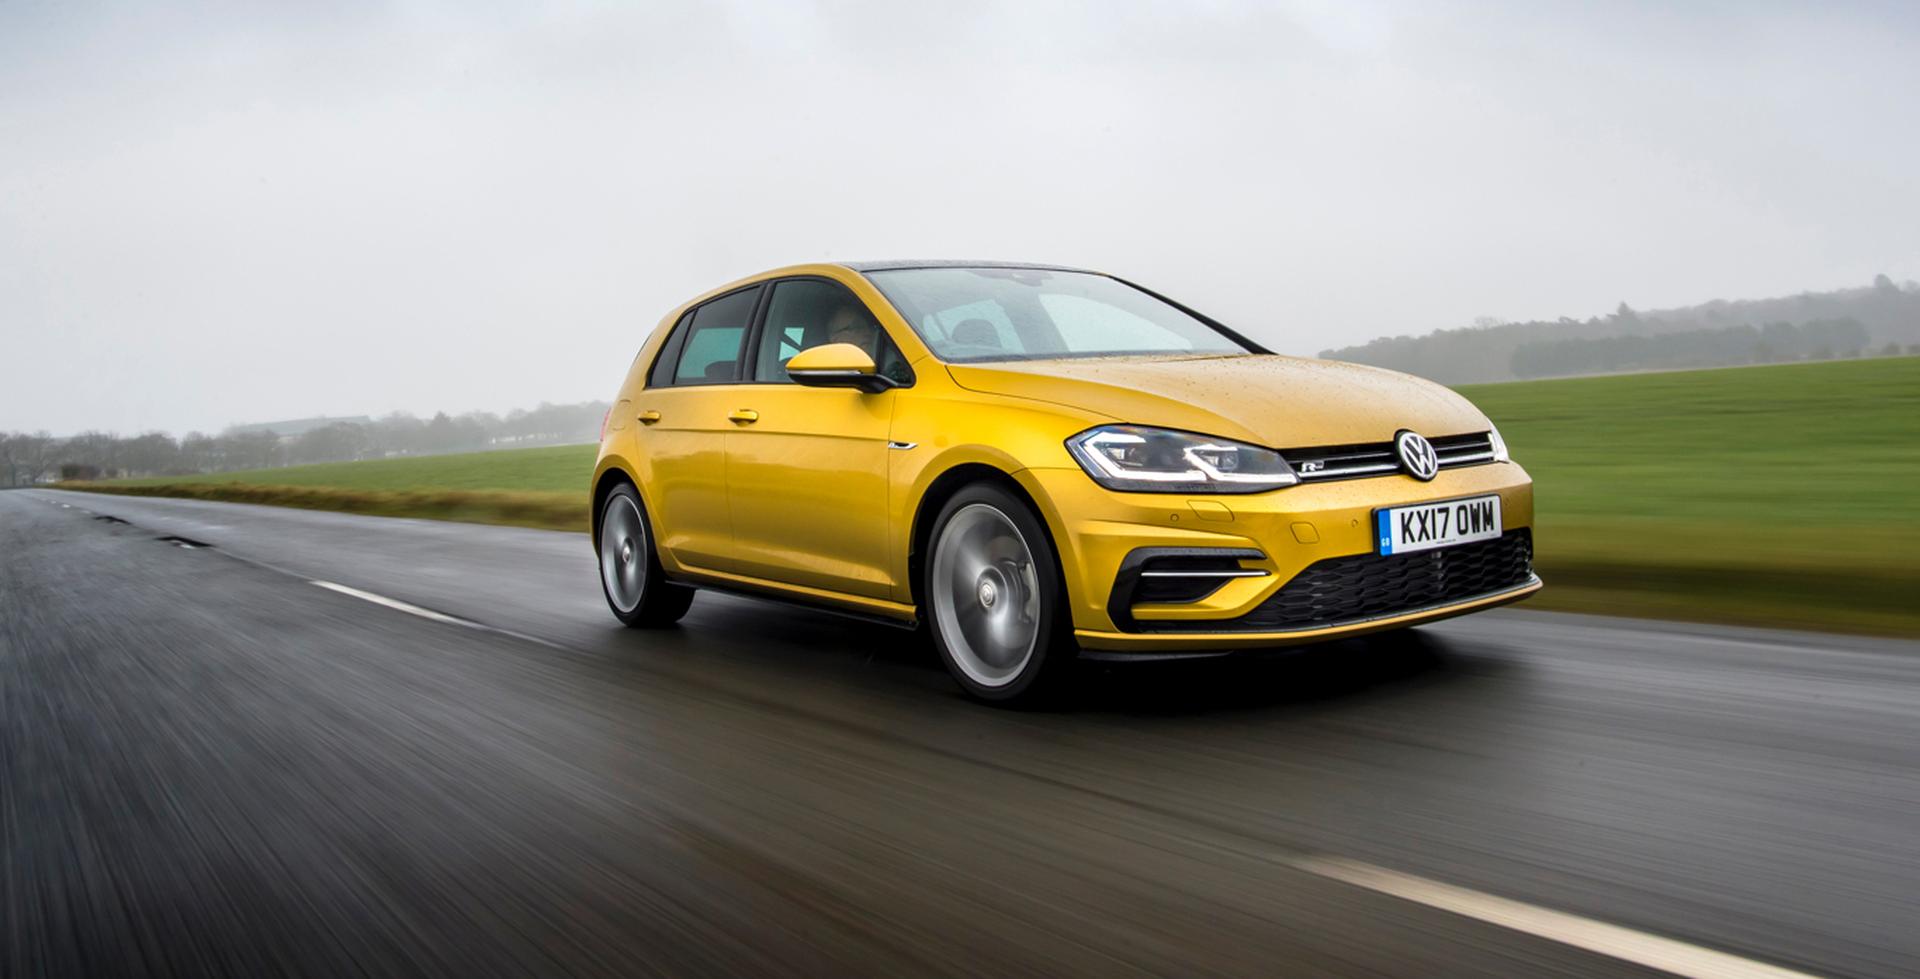 Nearly New Volkswagen Golf Cars for sale in the UK